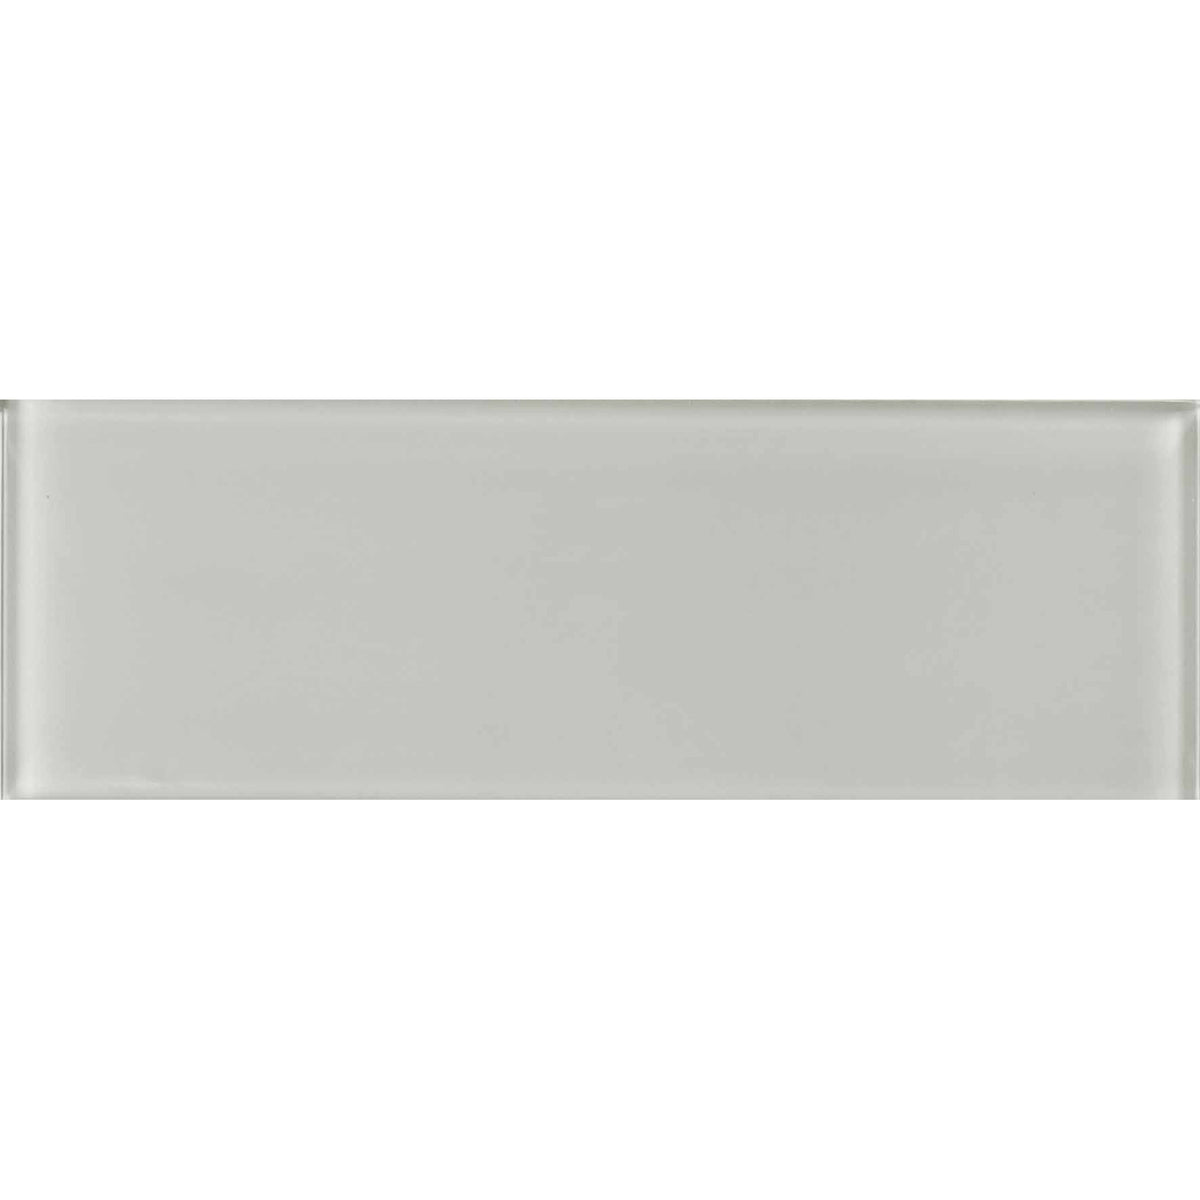 Anatolia - Element Glass Wall Tiles 8 in. x 24 in. - Mist